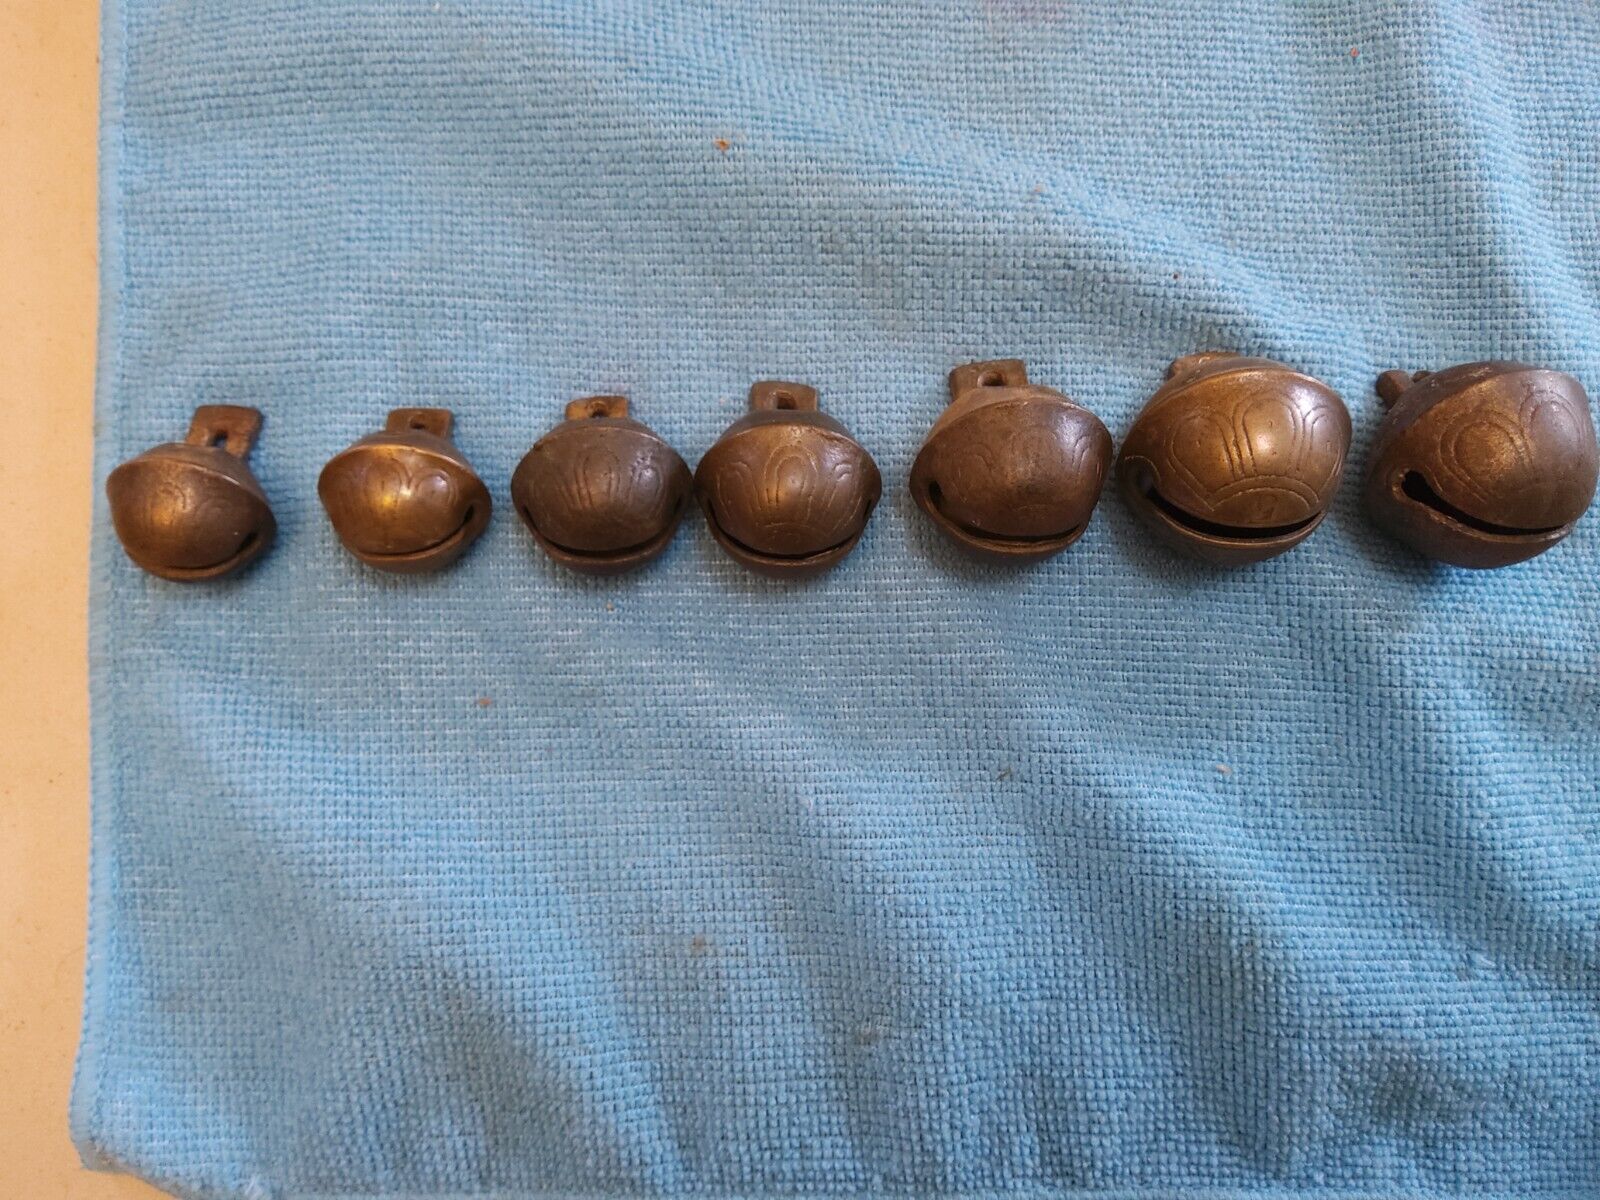 LOT OF 7 ANTIQUE BRASS GRADUATED LOOSE SLEIGH BELLS NO. 1 - NO.5